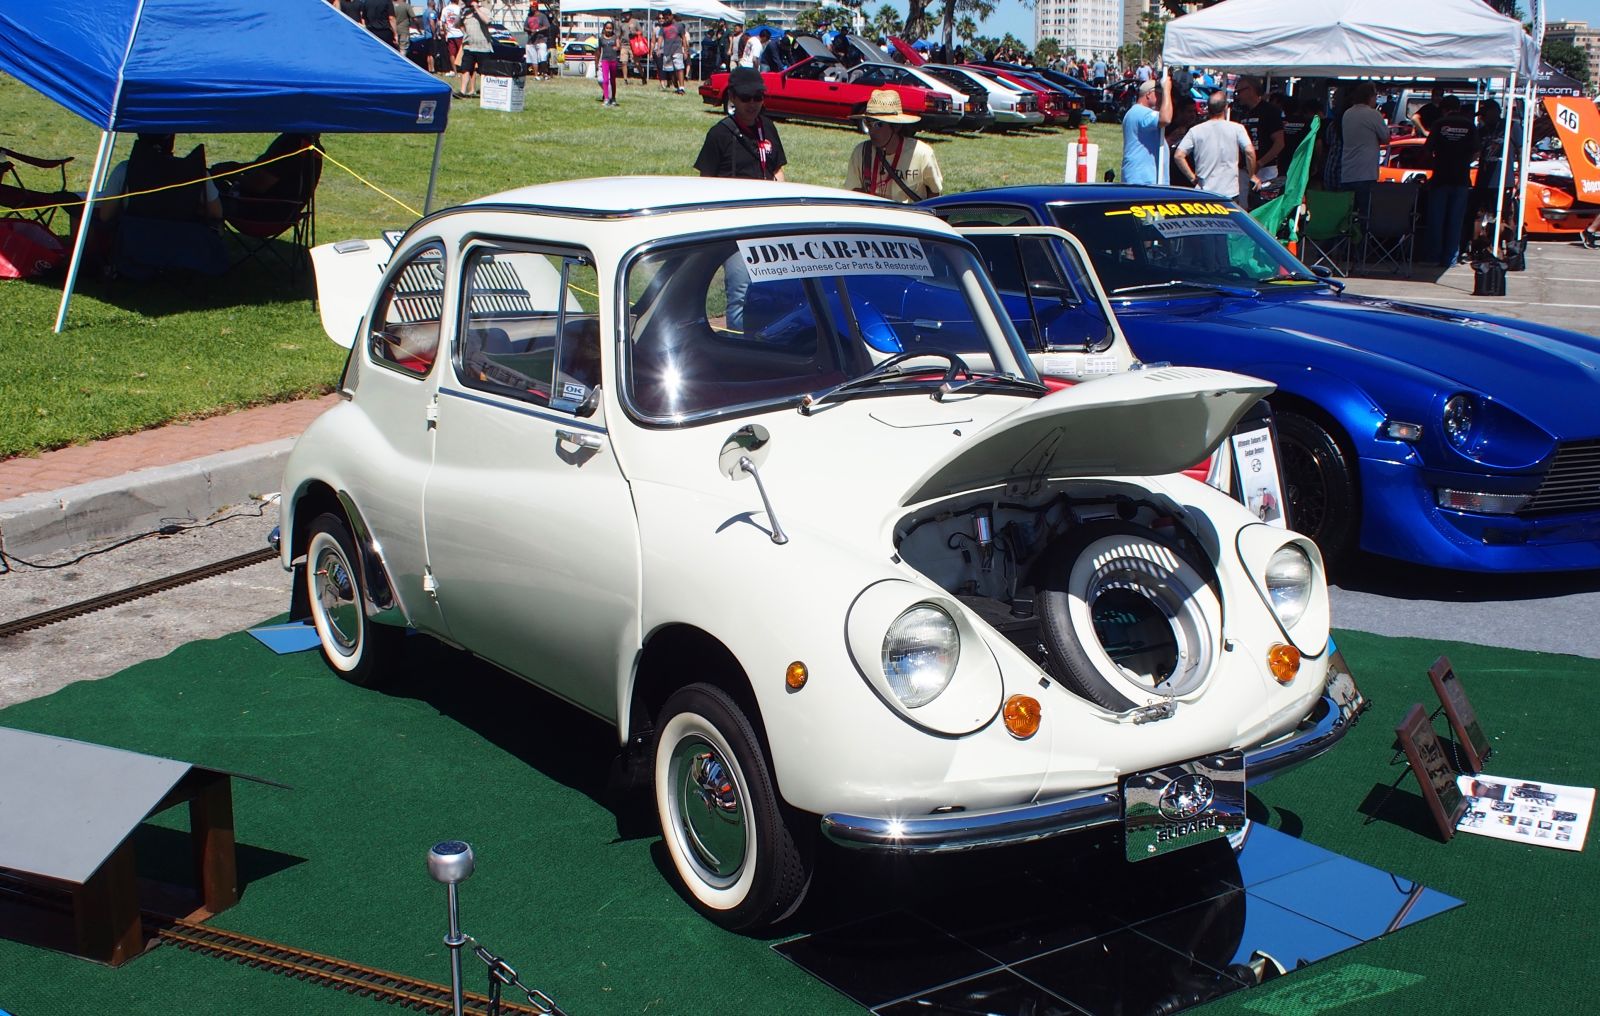 This restored to better than new 1969 Subaru 360 shows up every year to blow my mind.